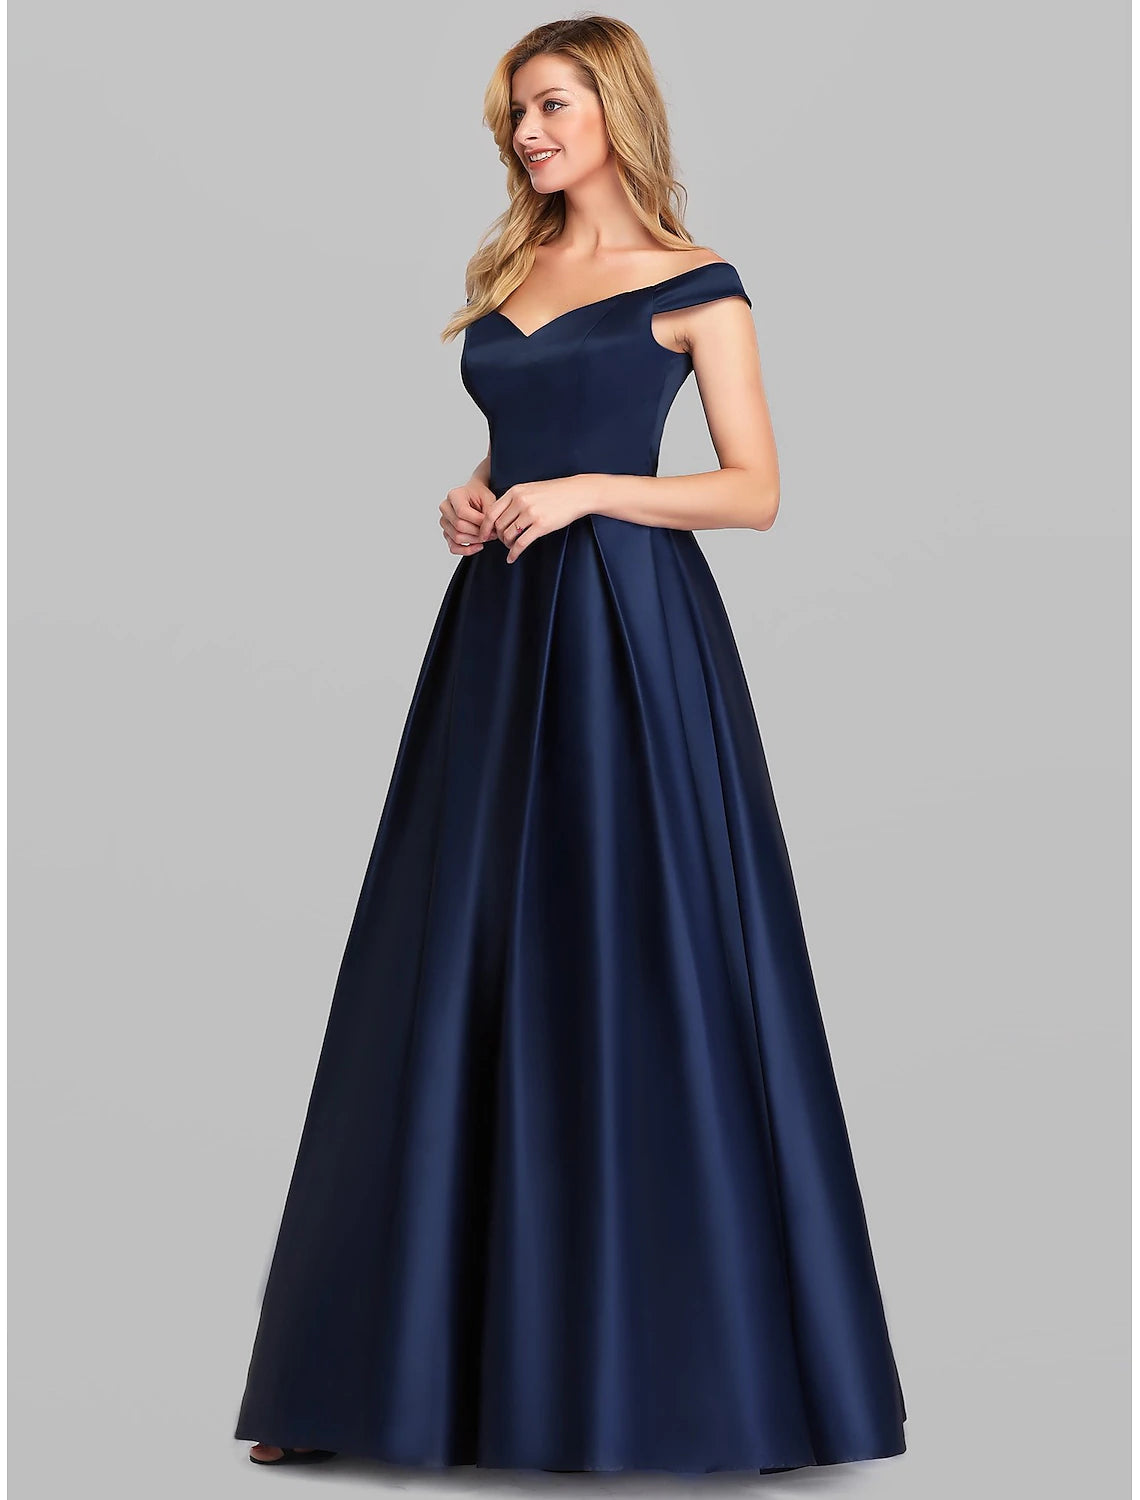 A-Line Evening Gown Party Dress Elegant & Luxurious Dress Wedding Guest Formal Evening Floor Length Sleeveless Plunging Neck Satin with Ruched